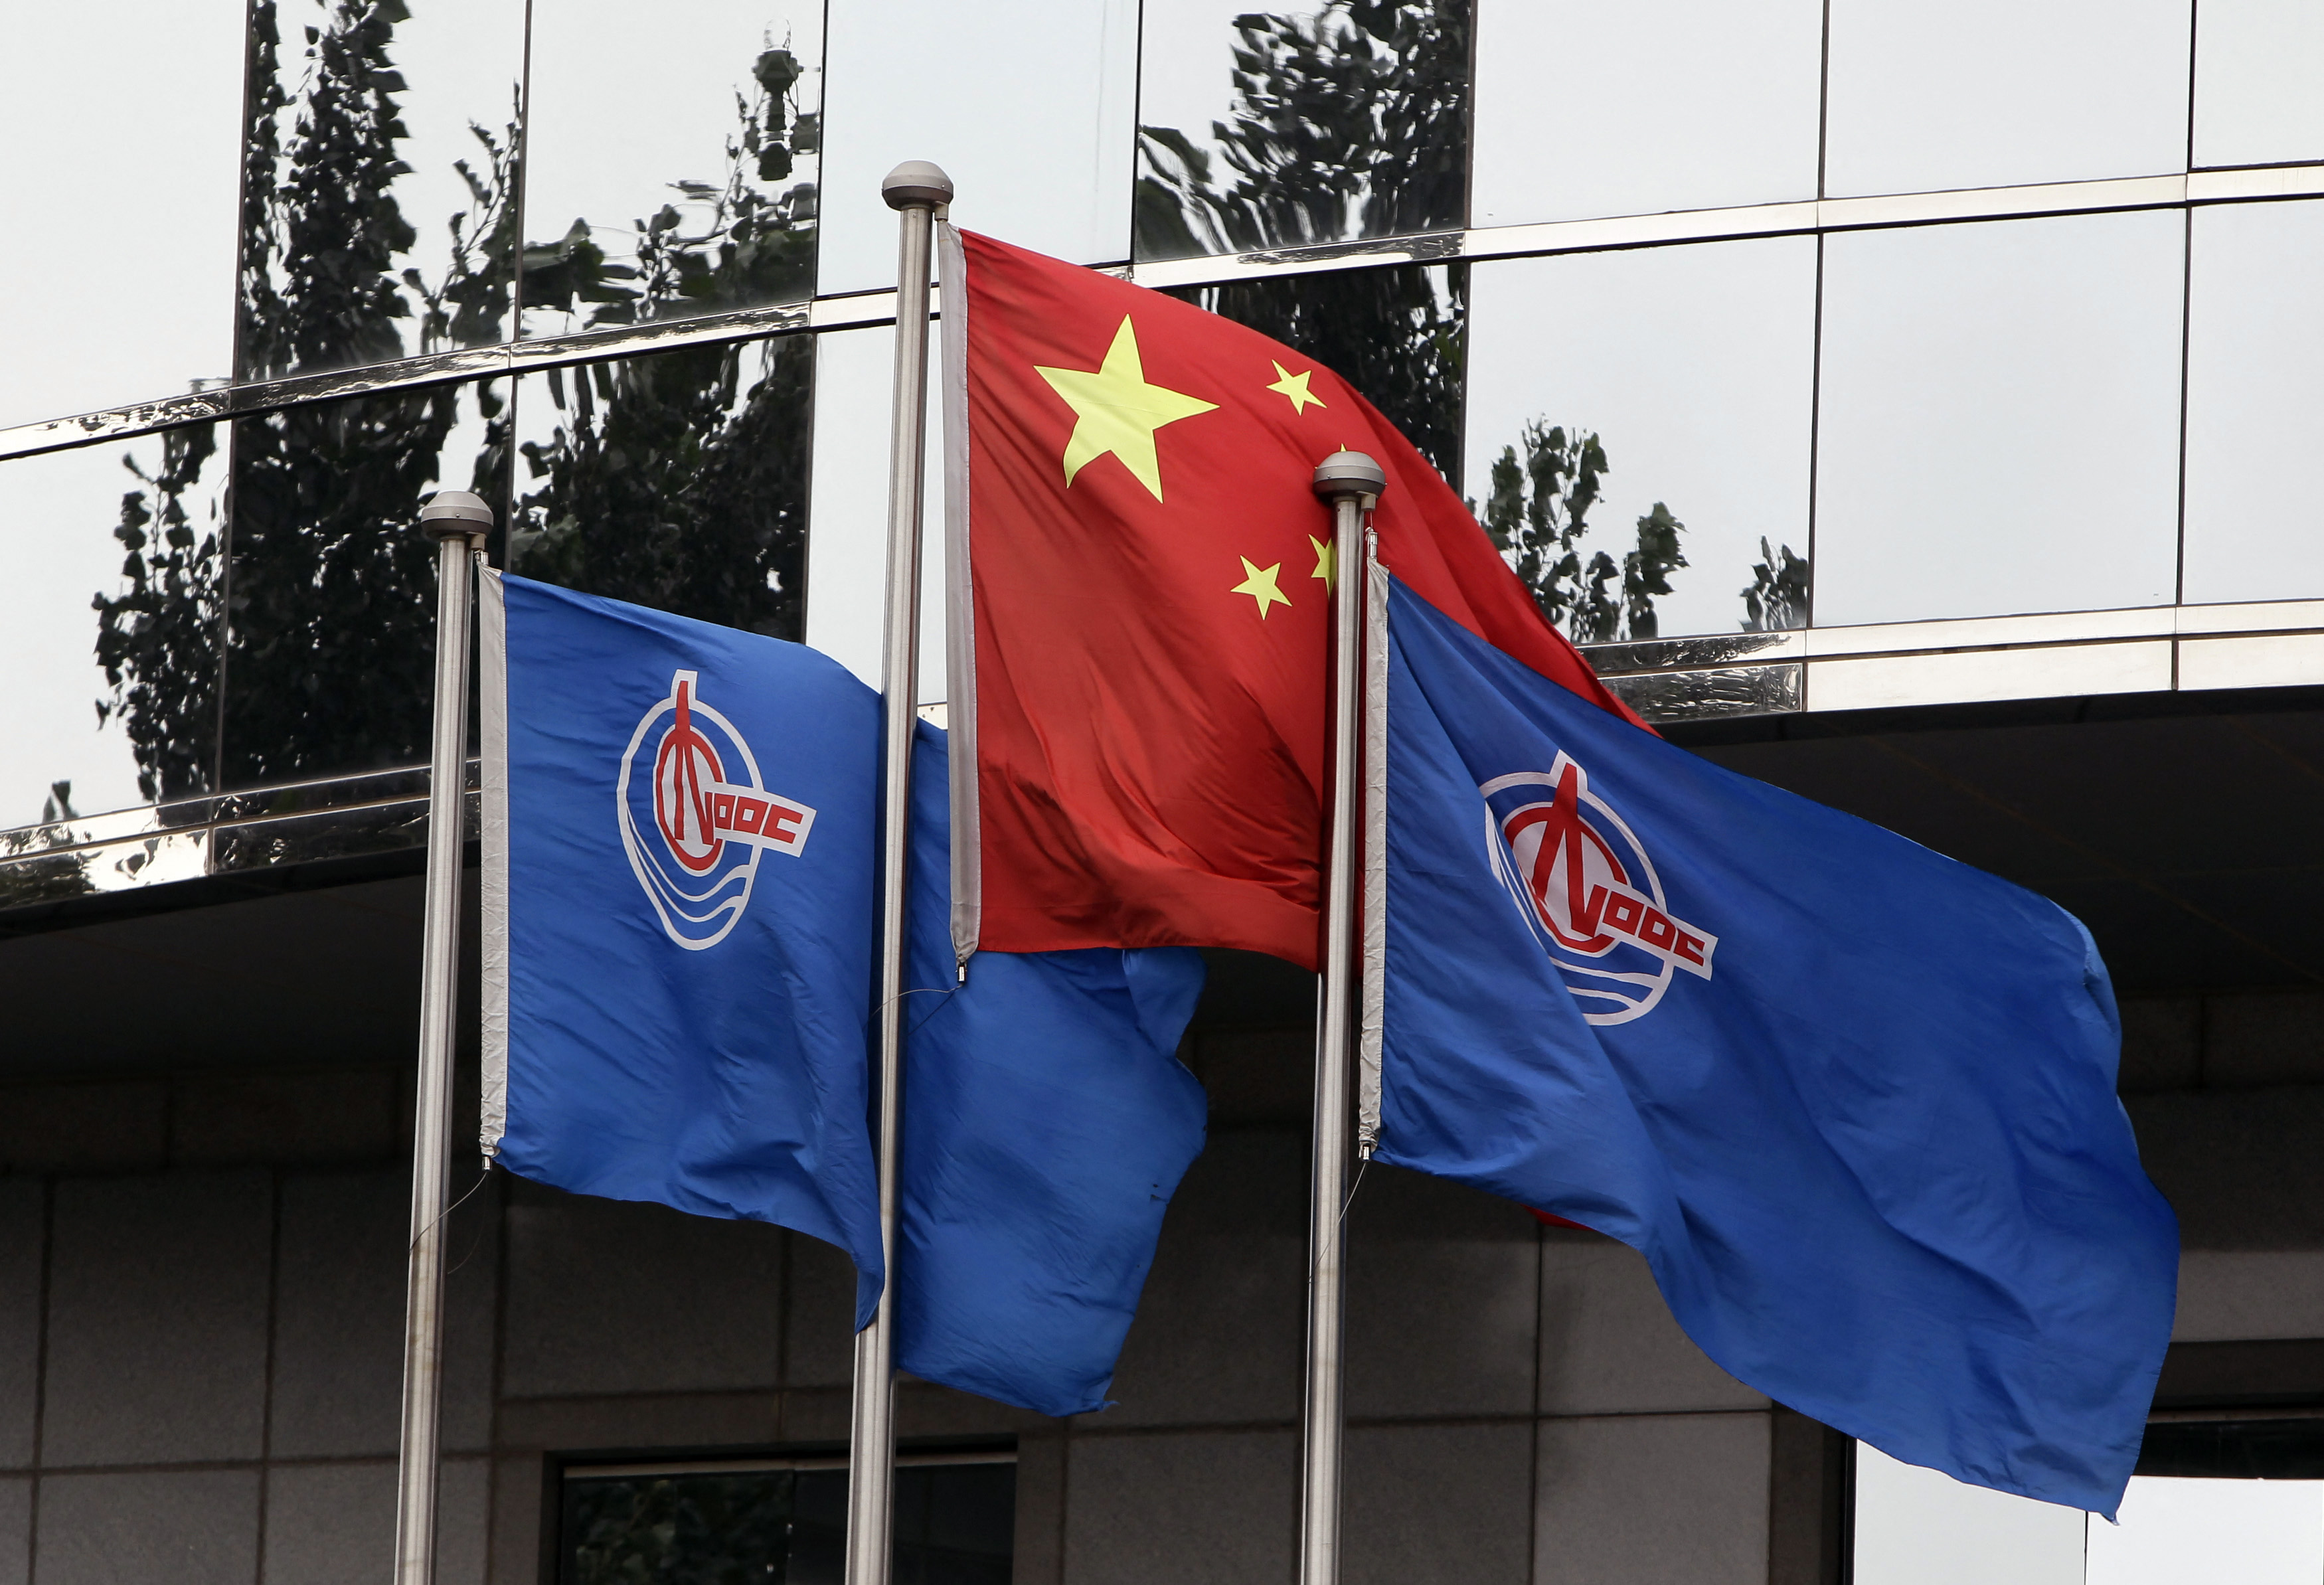 Flags of China National Offshore Oil Corp (CNOOC) fly beside the China flag in front of its headquarters building in Beijing